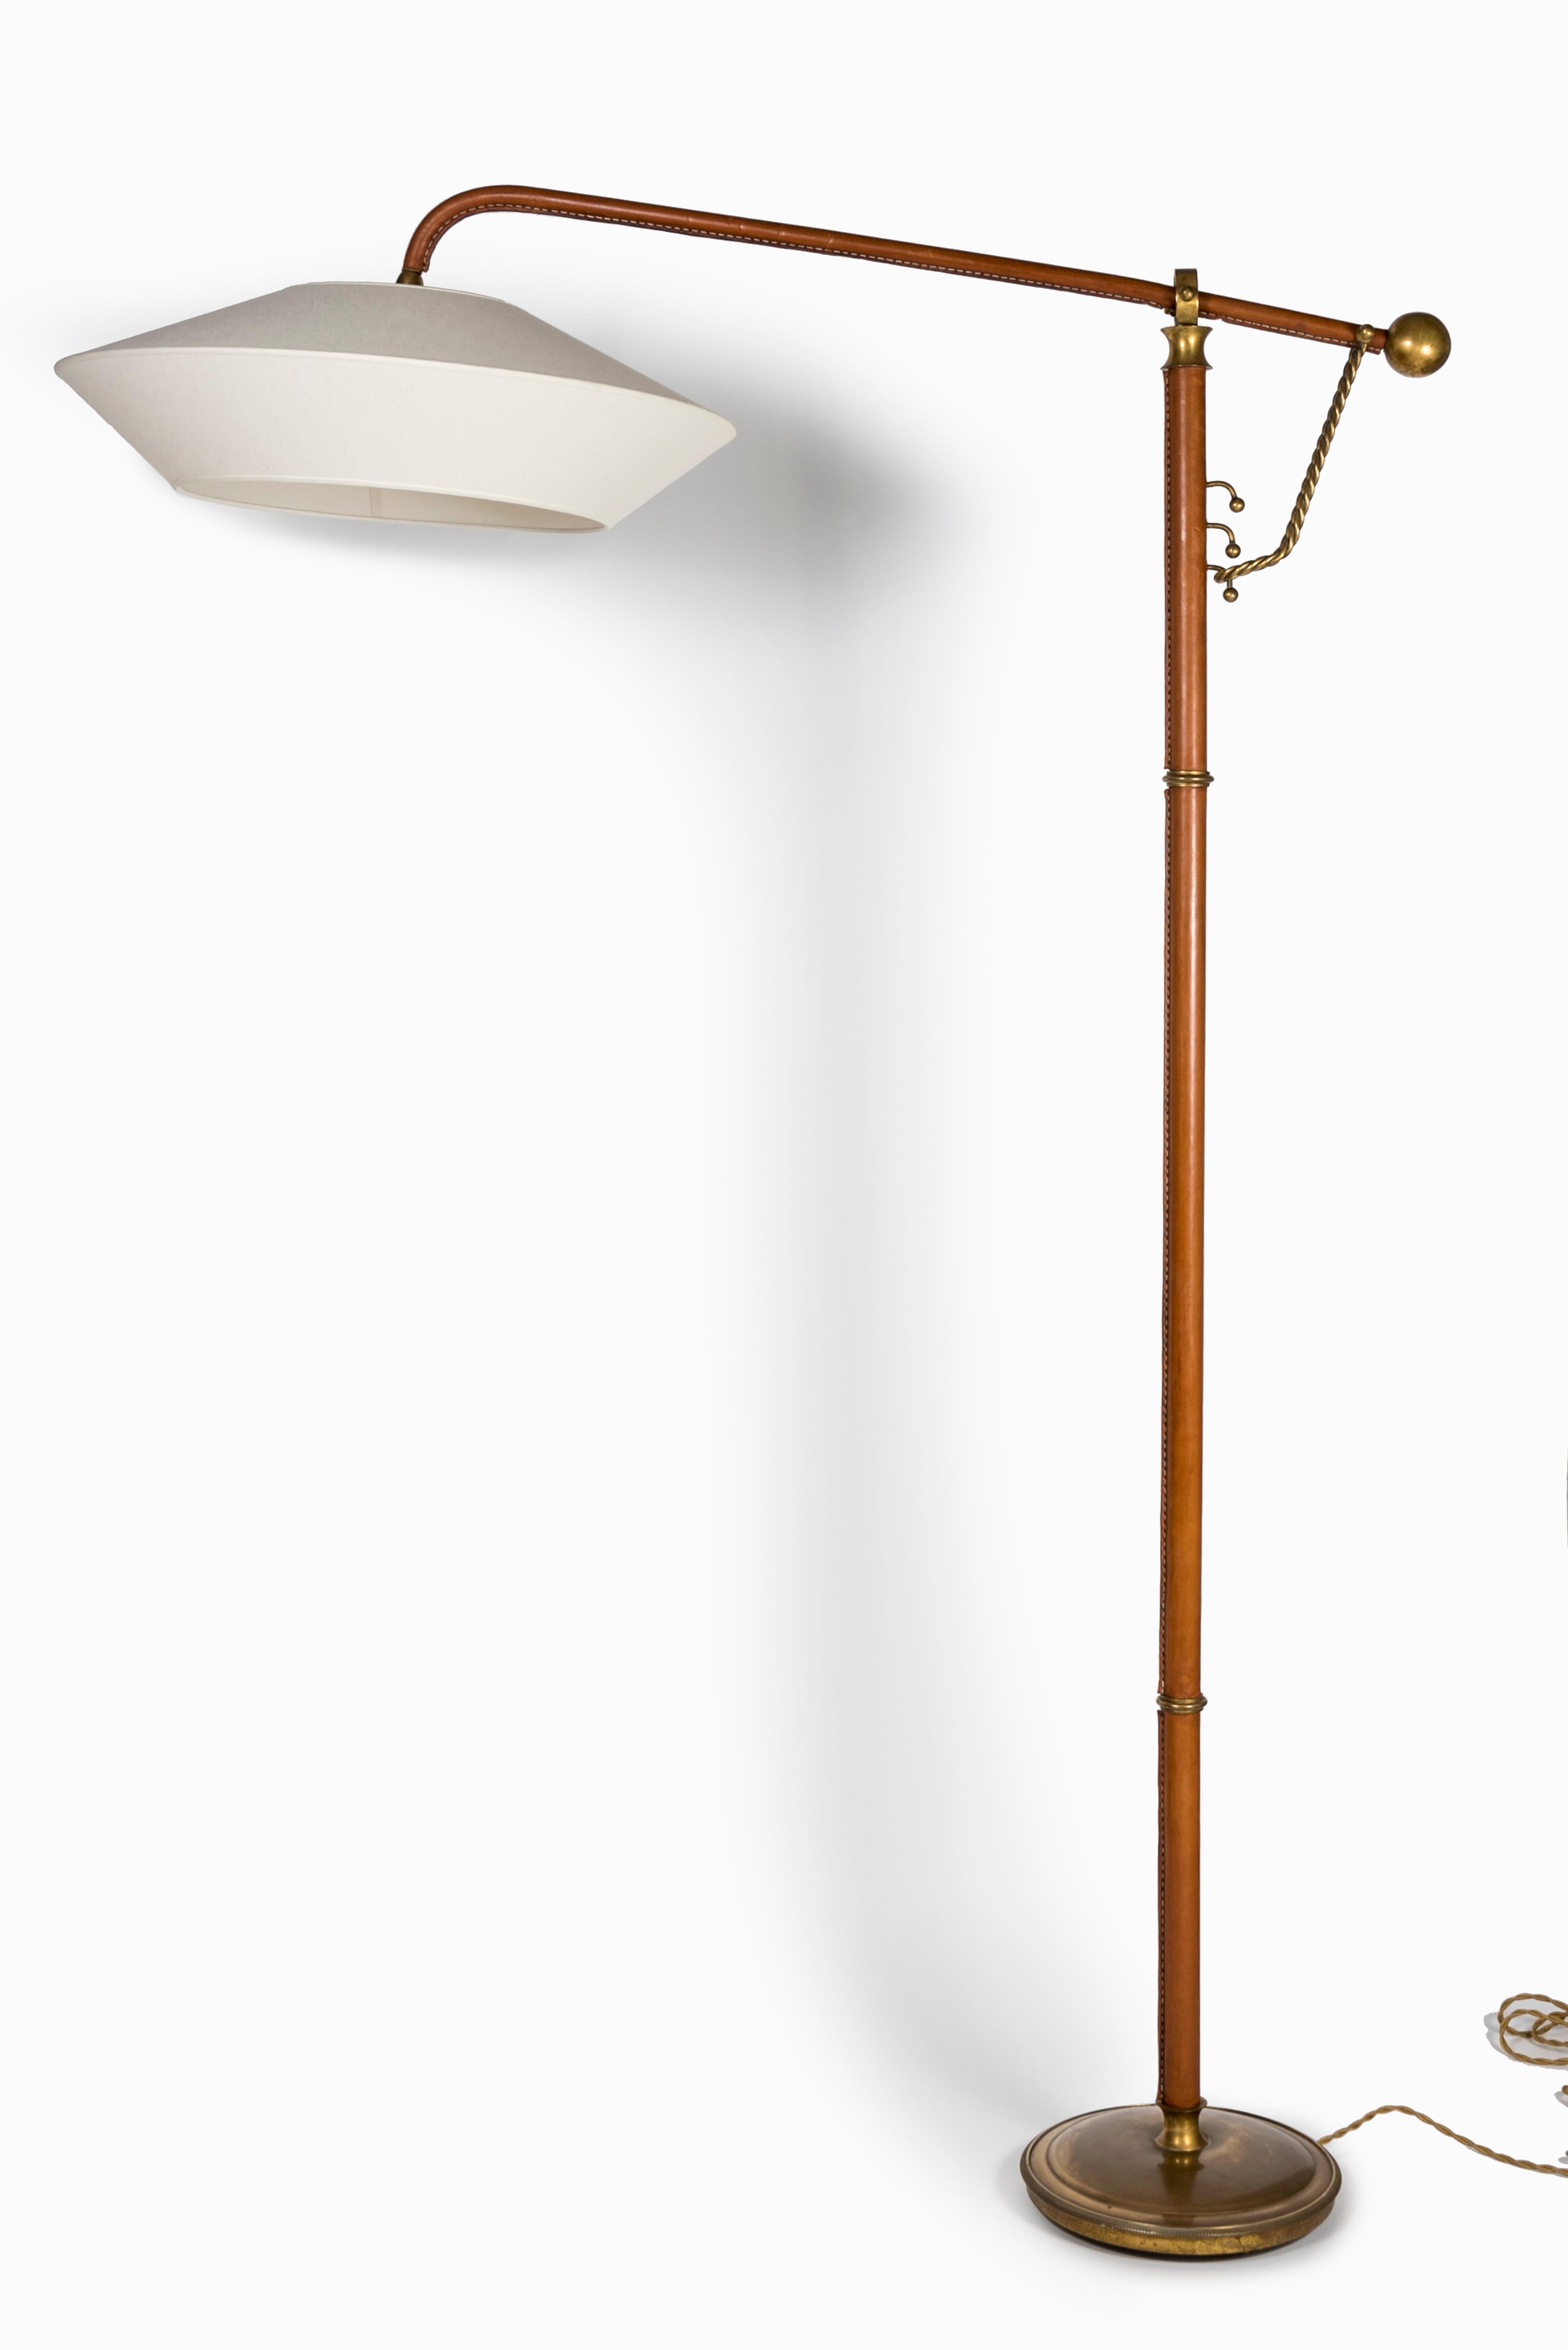 Very unusual stitched leather floor lamp by Jacques Adnet probably a collaboration with Gilbert Poillerat.
 